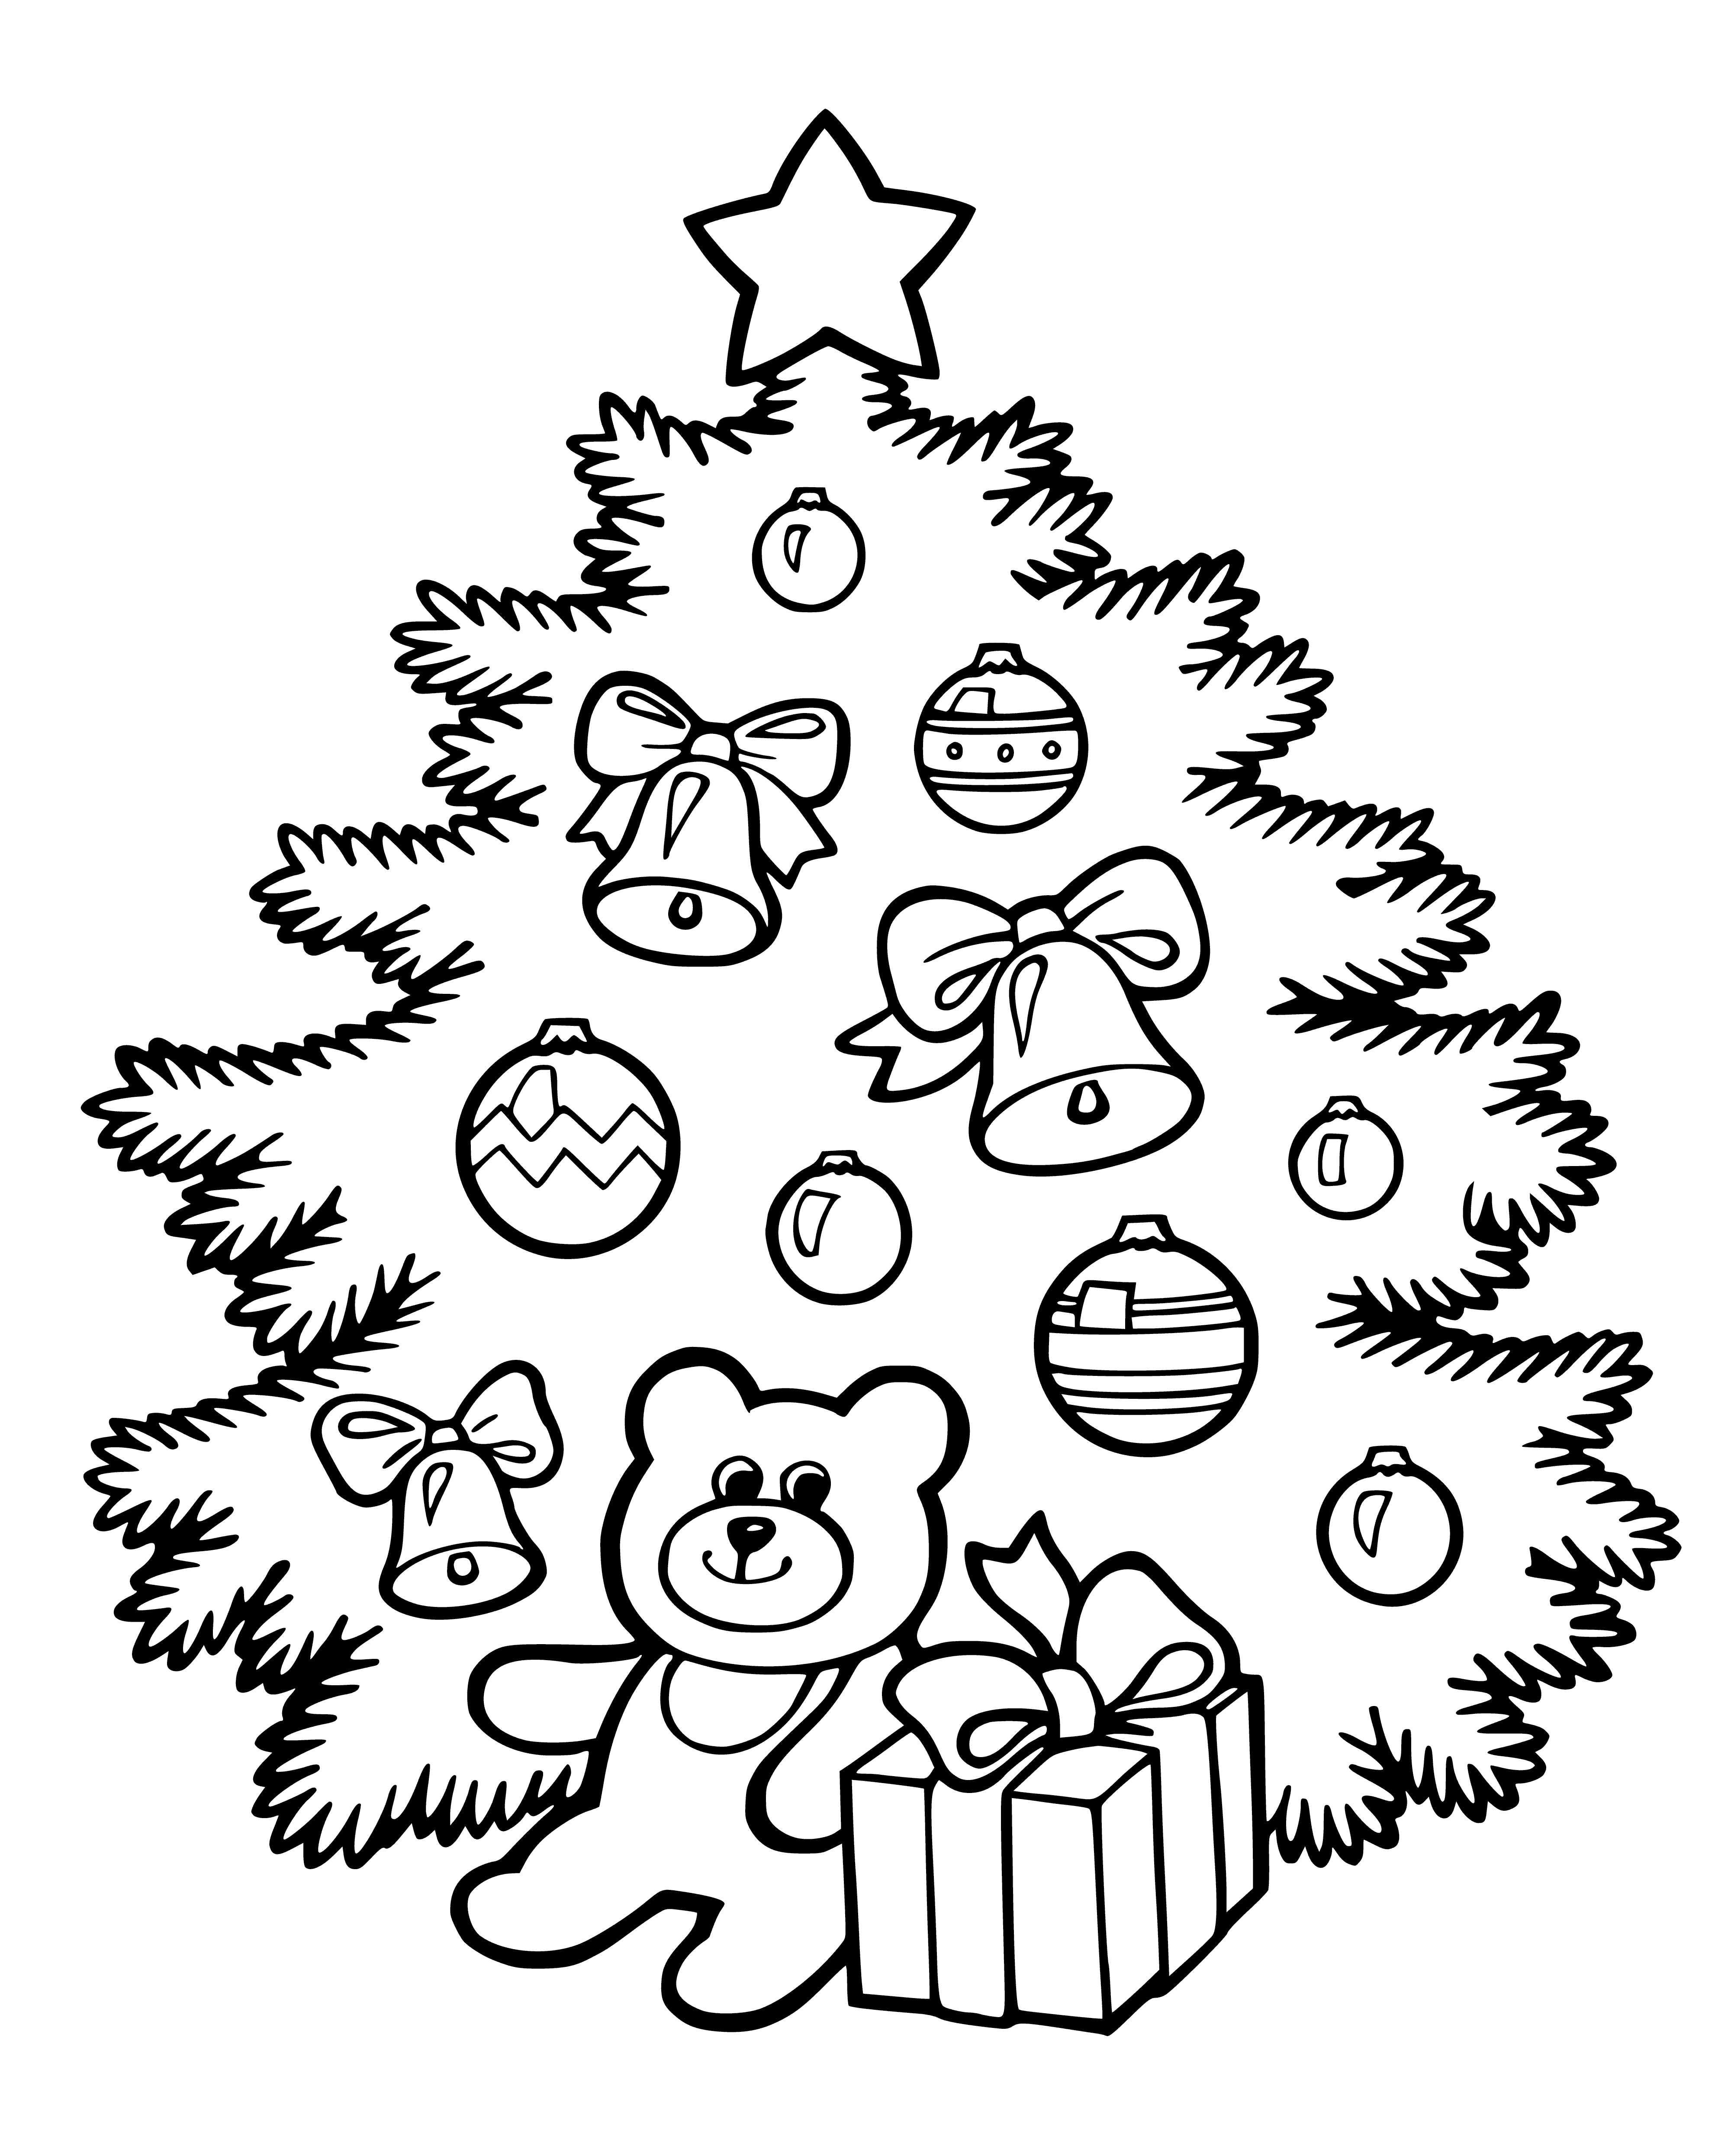 Make an elegant, herringbone Christmas tree design with these intricate coloring pages! Perfect for a holiday decoration or getting into the spirit.